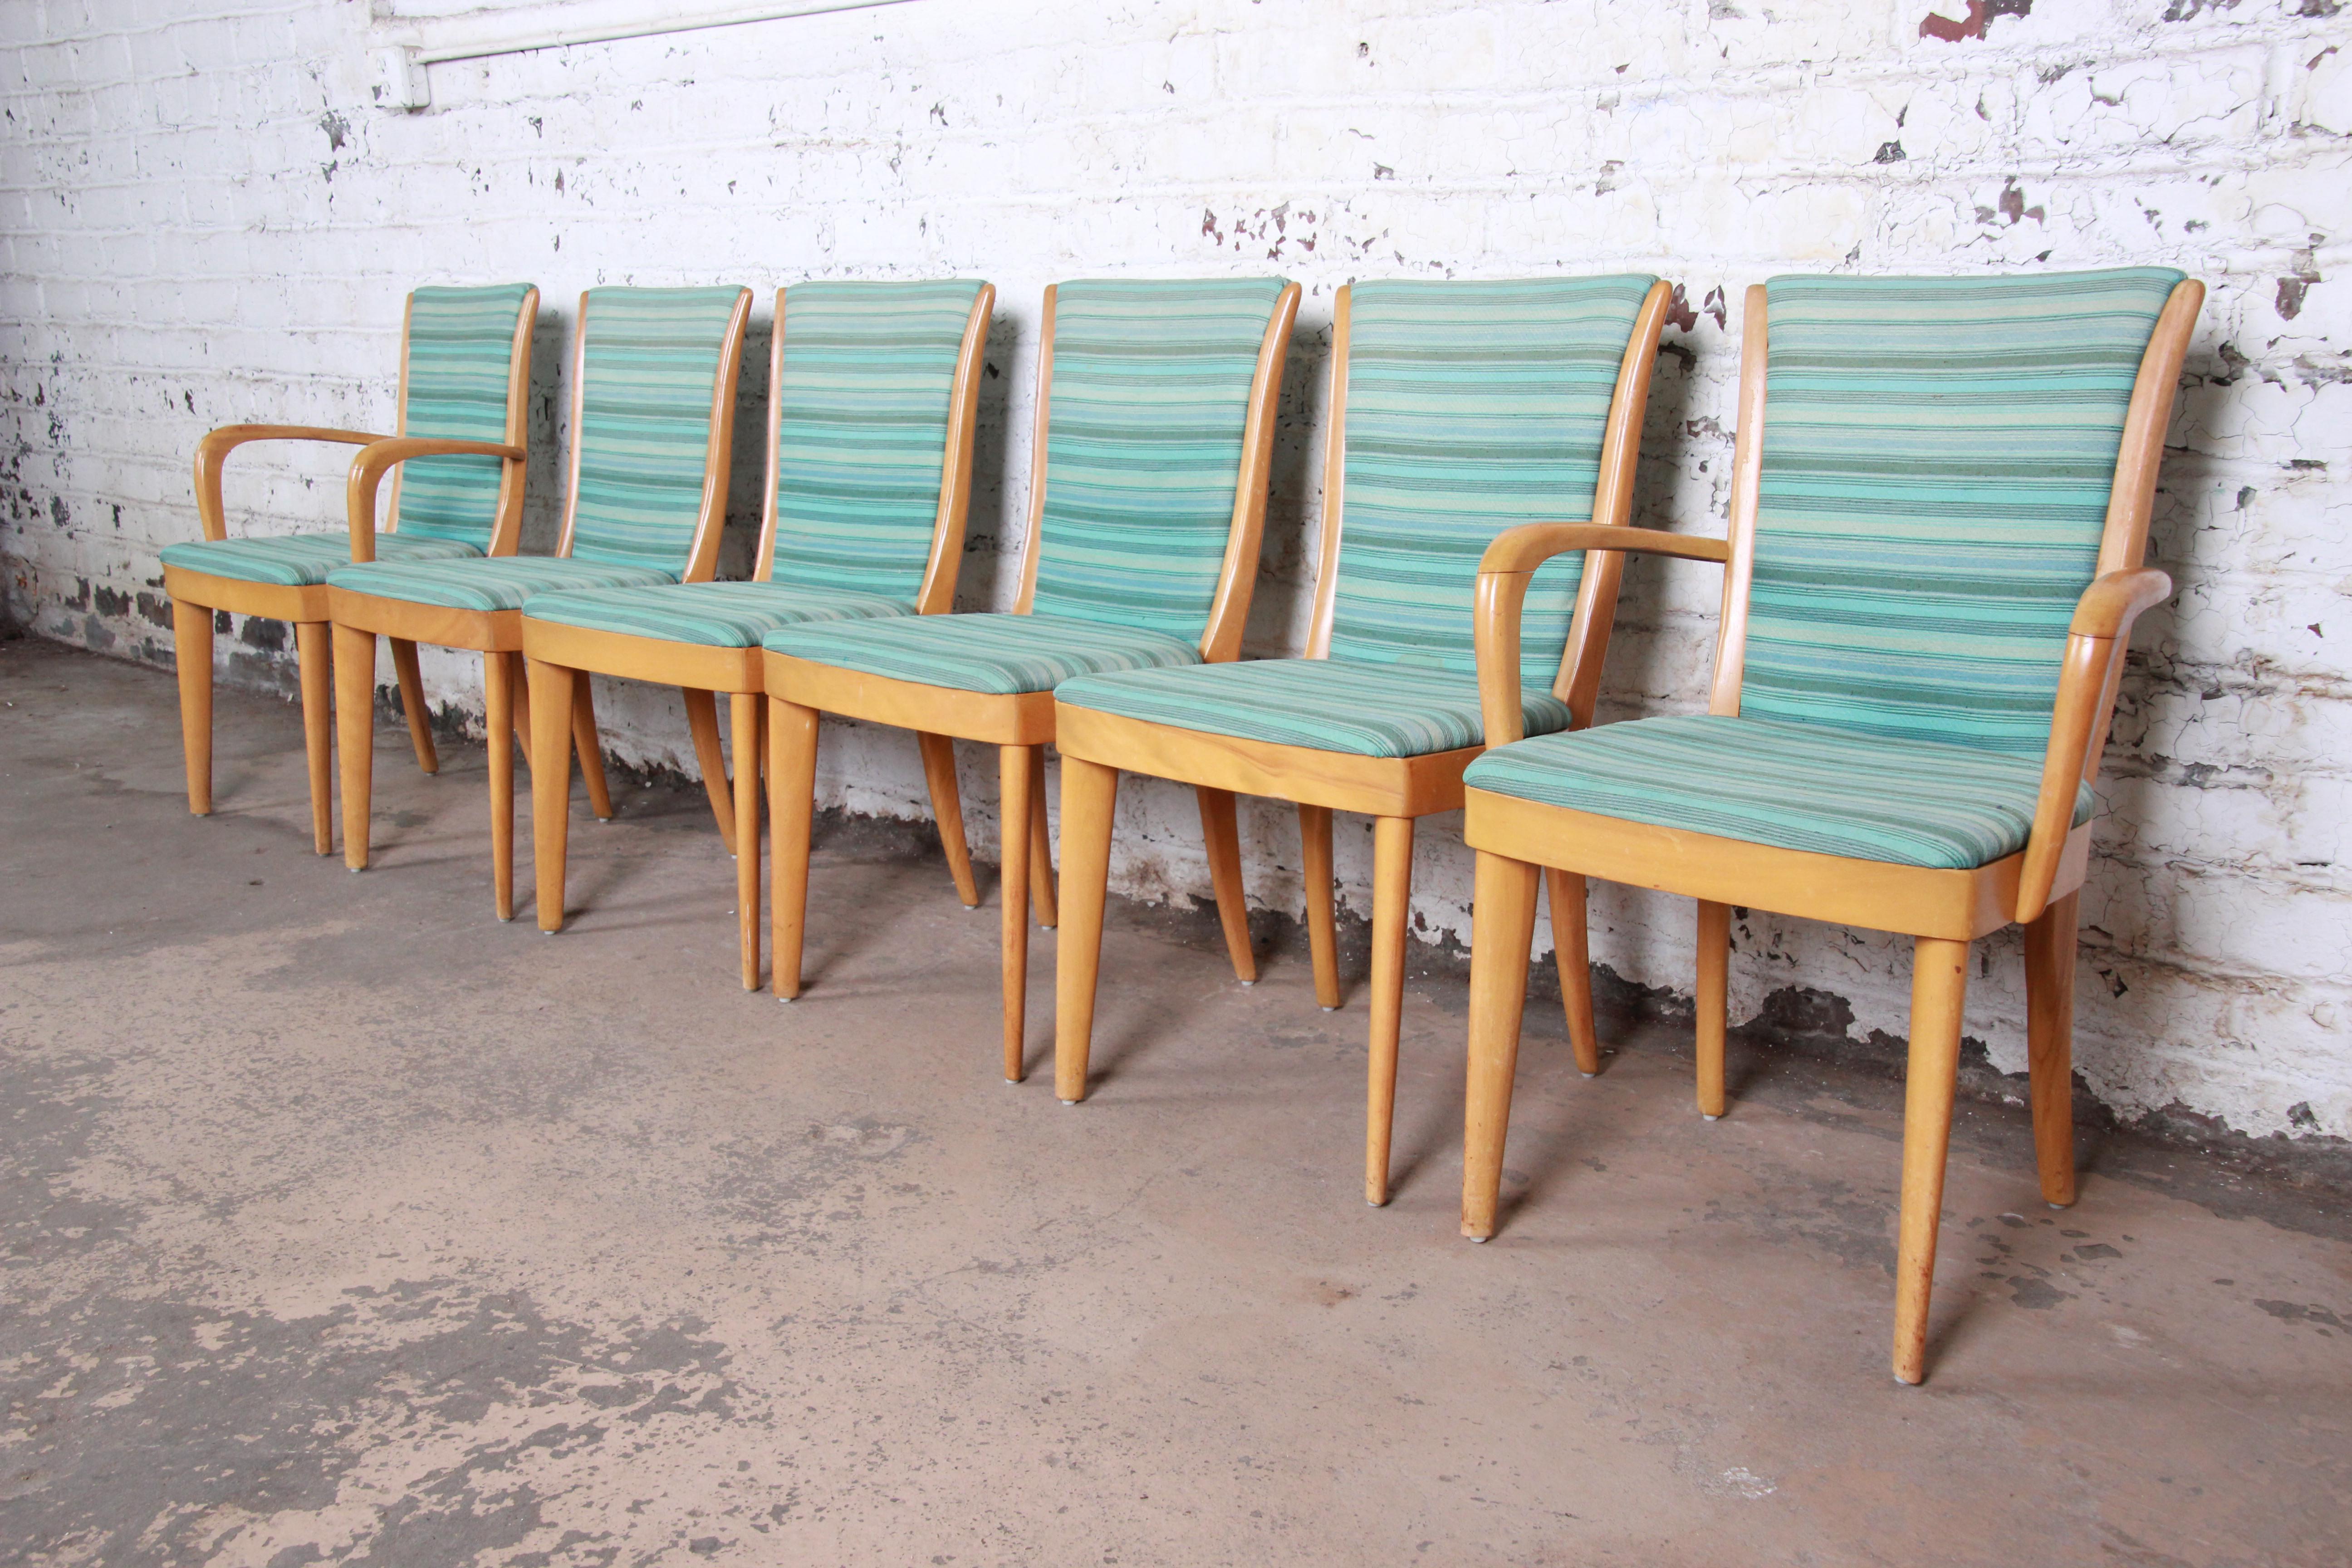 A gorgeous set of six mid-century modern dining chairs by Heywood-Wakefield. The set includes two captain armchairs and four side chairs. The chairs feature solid sculpted maple frames and vintage striped upholstery in blues and greens. The original